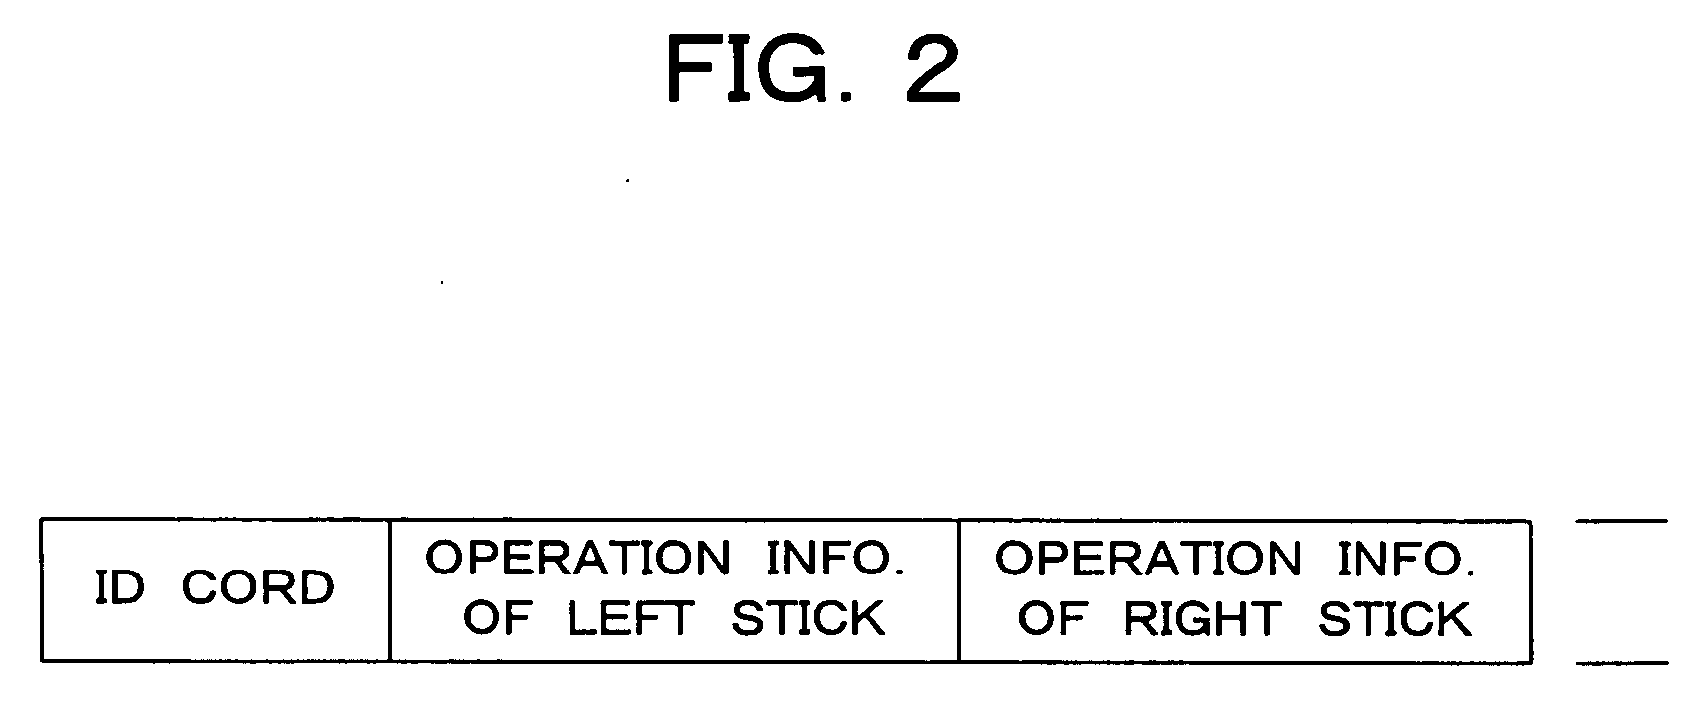 Model traveling device, model having such traveling device, and remote-controlled toy